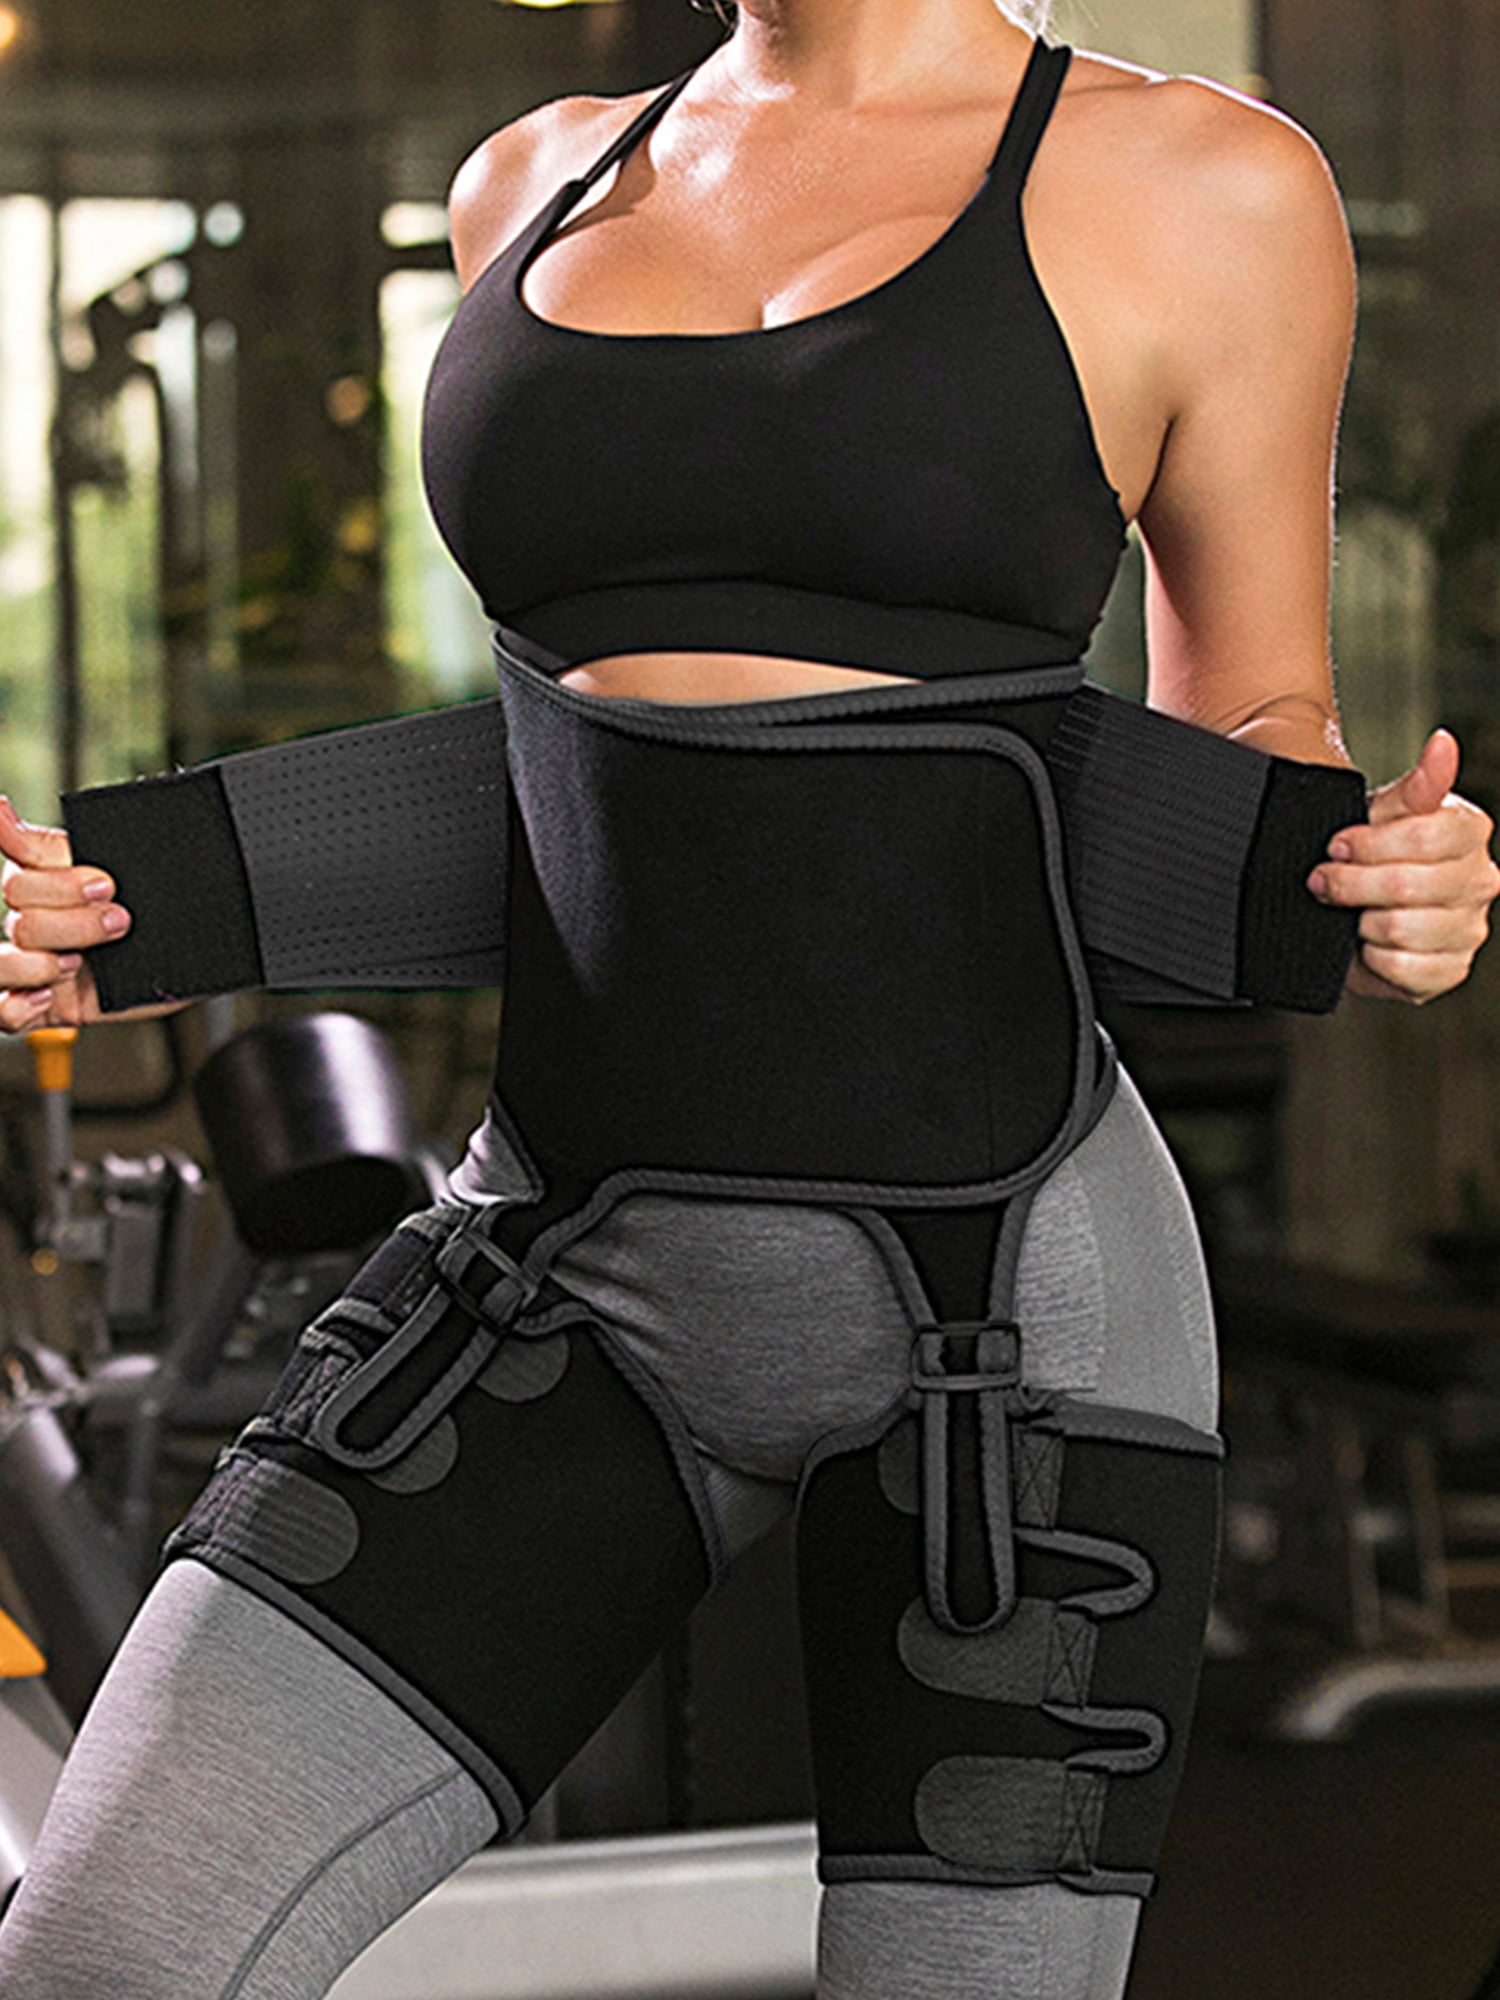 30 Minute Workout Waist Trainer Reviews for Build Muscle